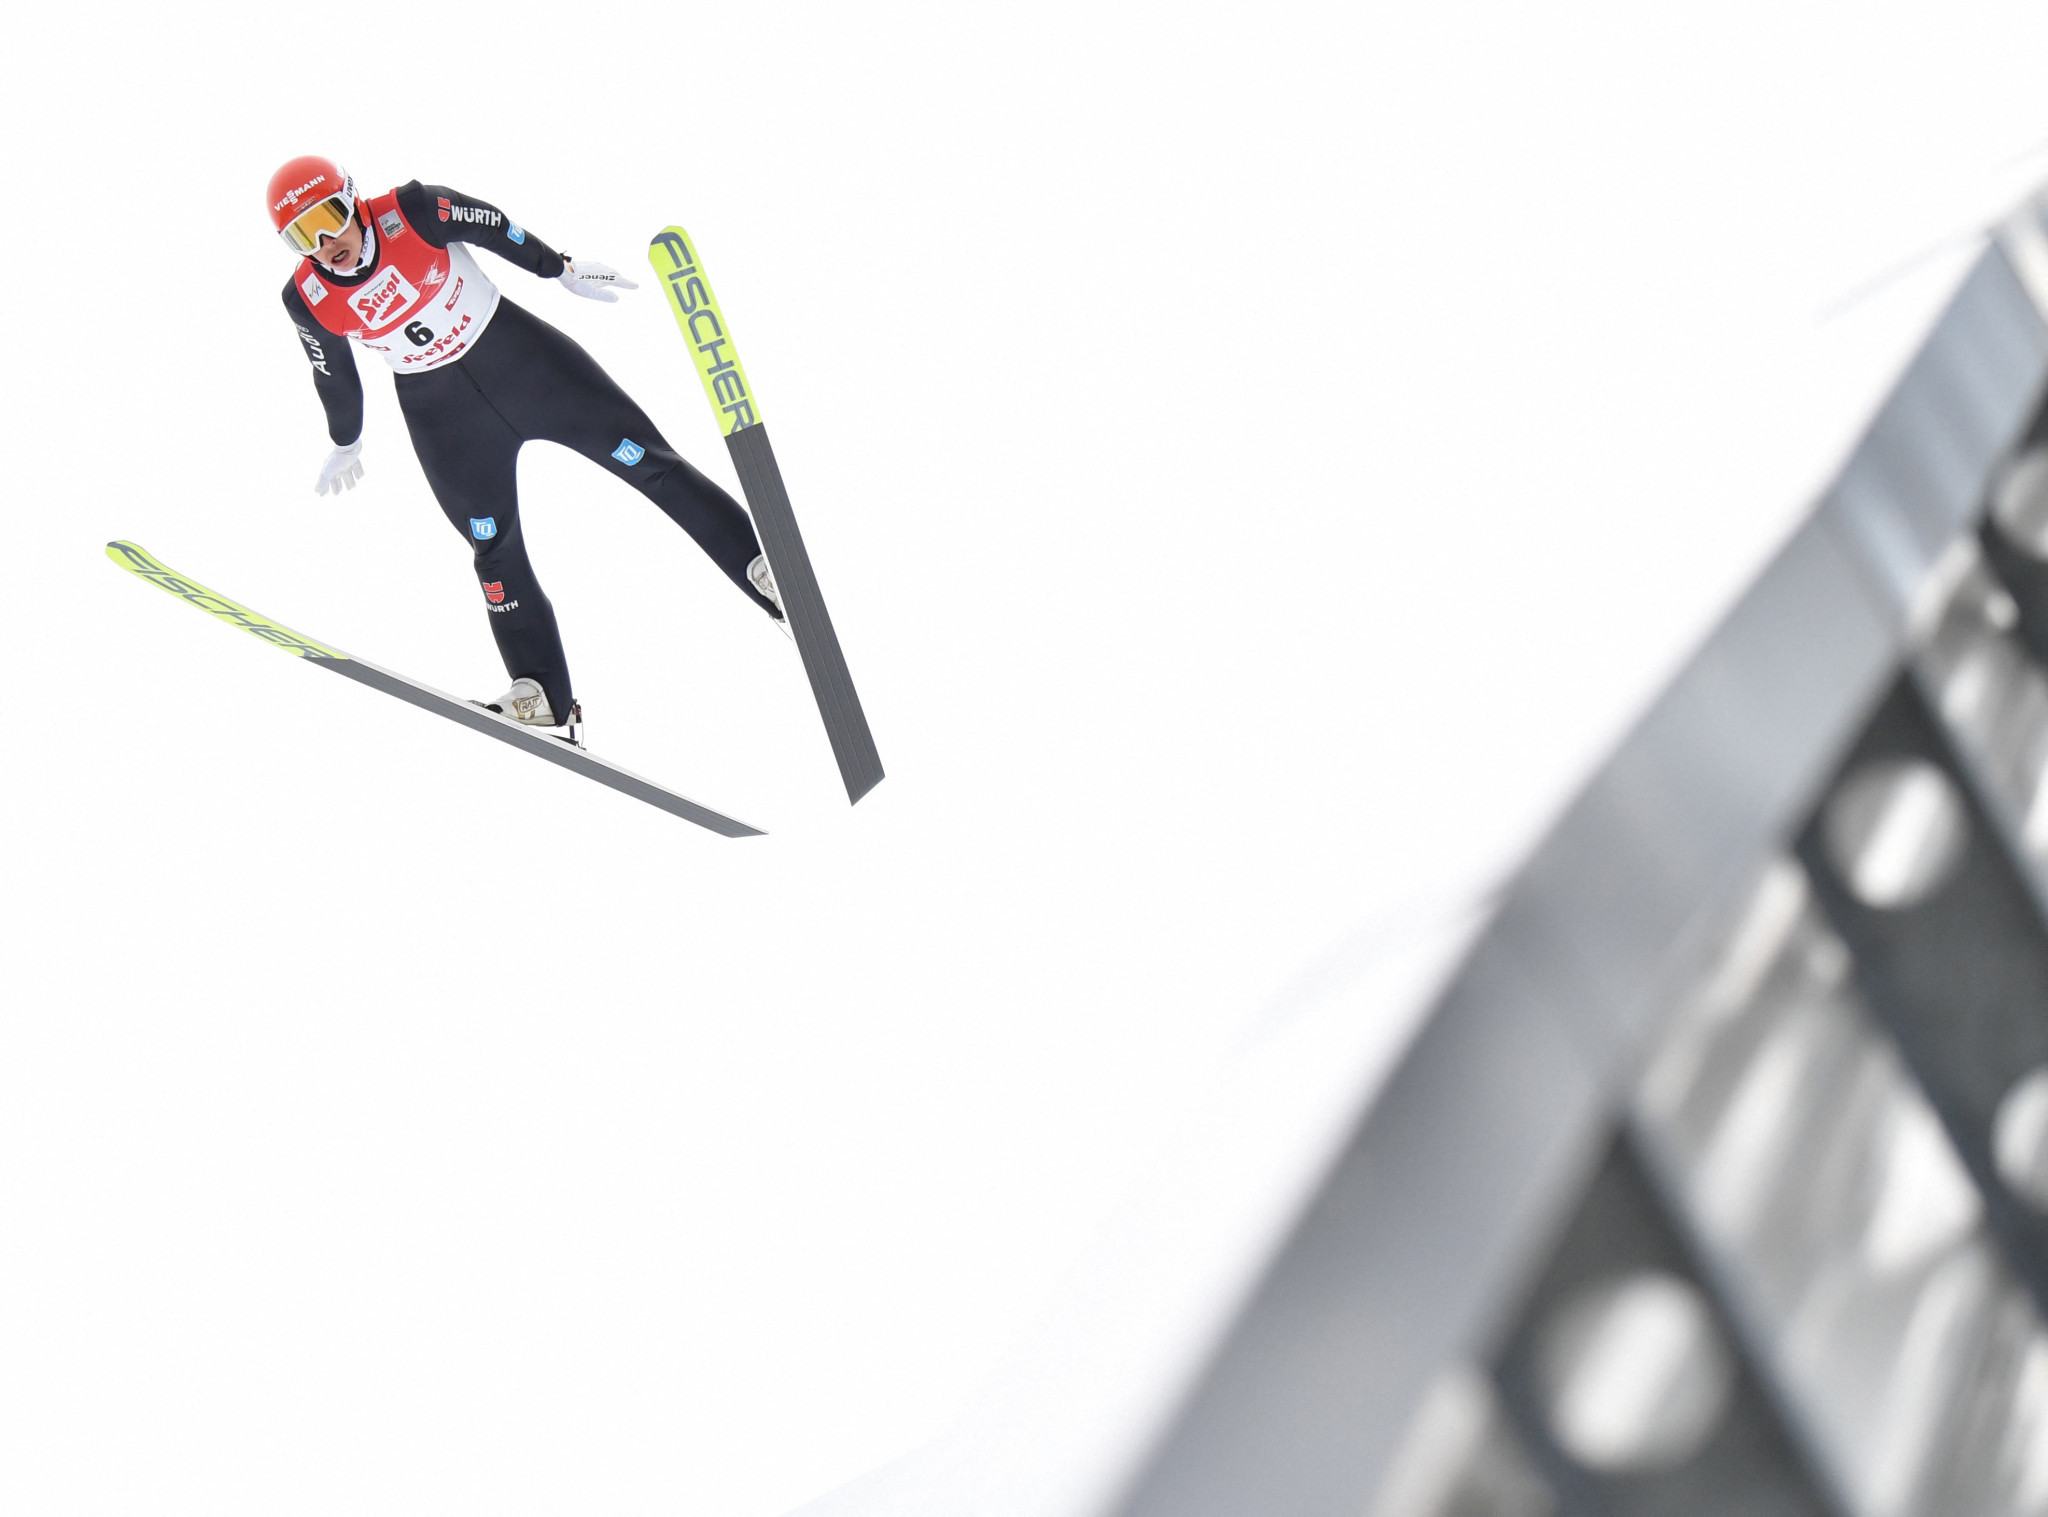 German Nordic combined athlete Eric Frenzel is among athletes to have experience isolation at Beijing 2022 ©Getty Images